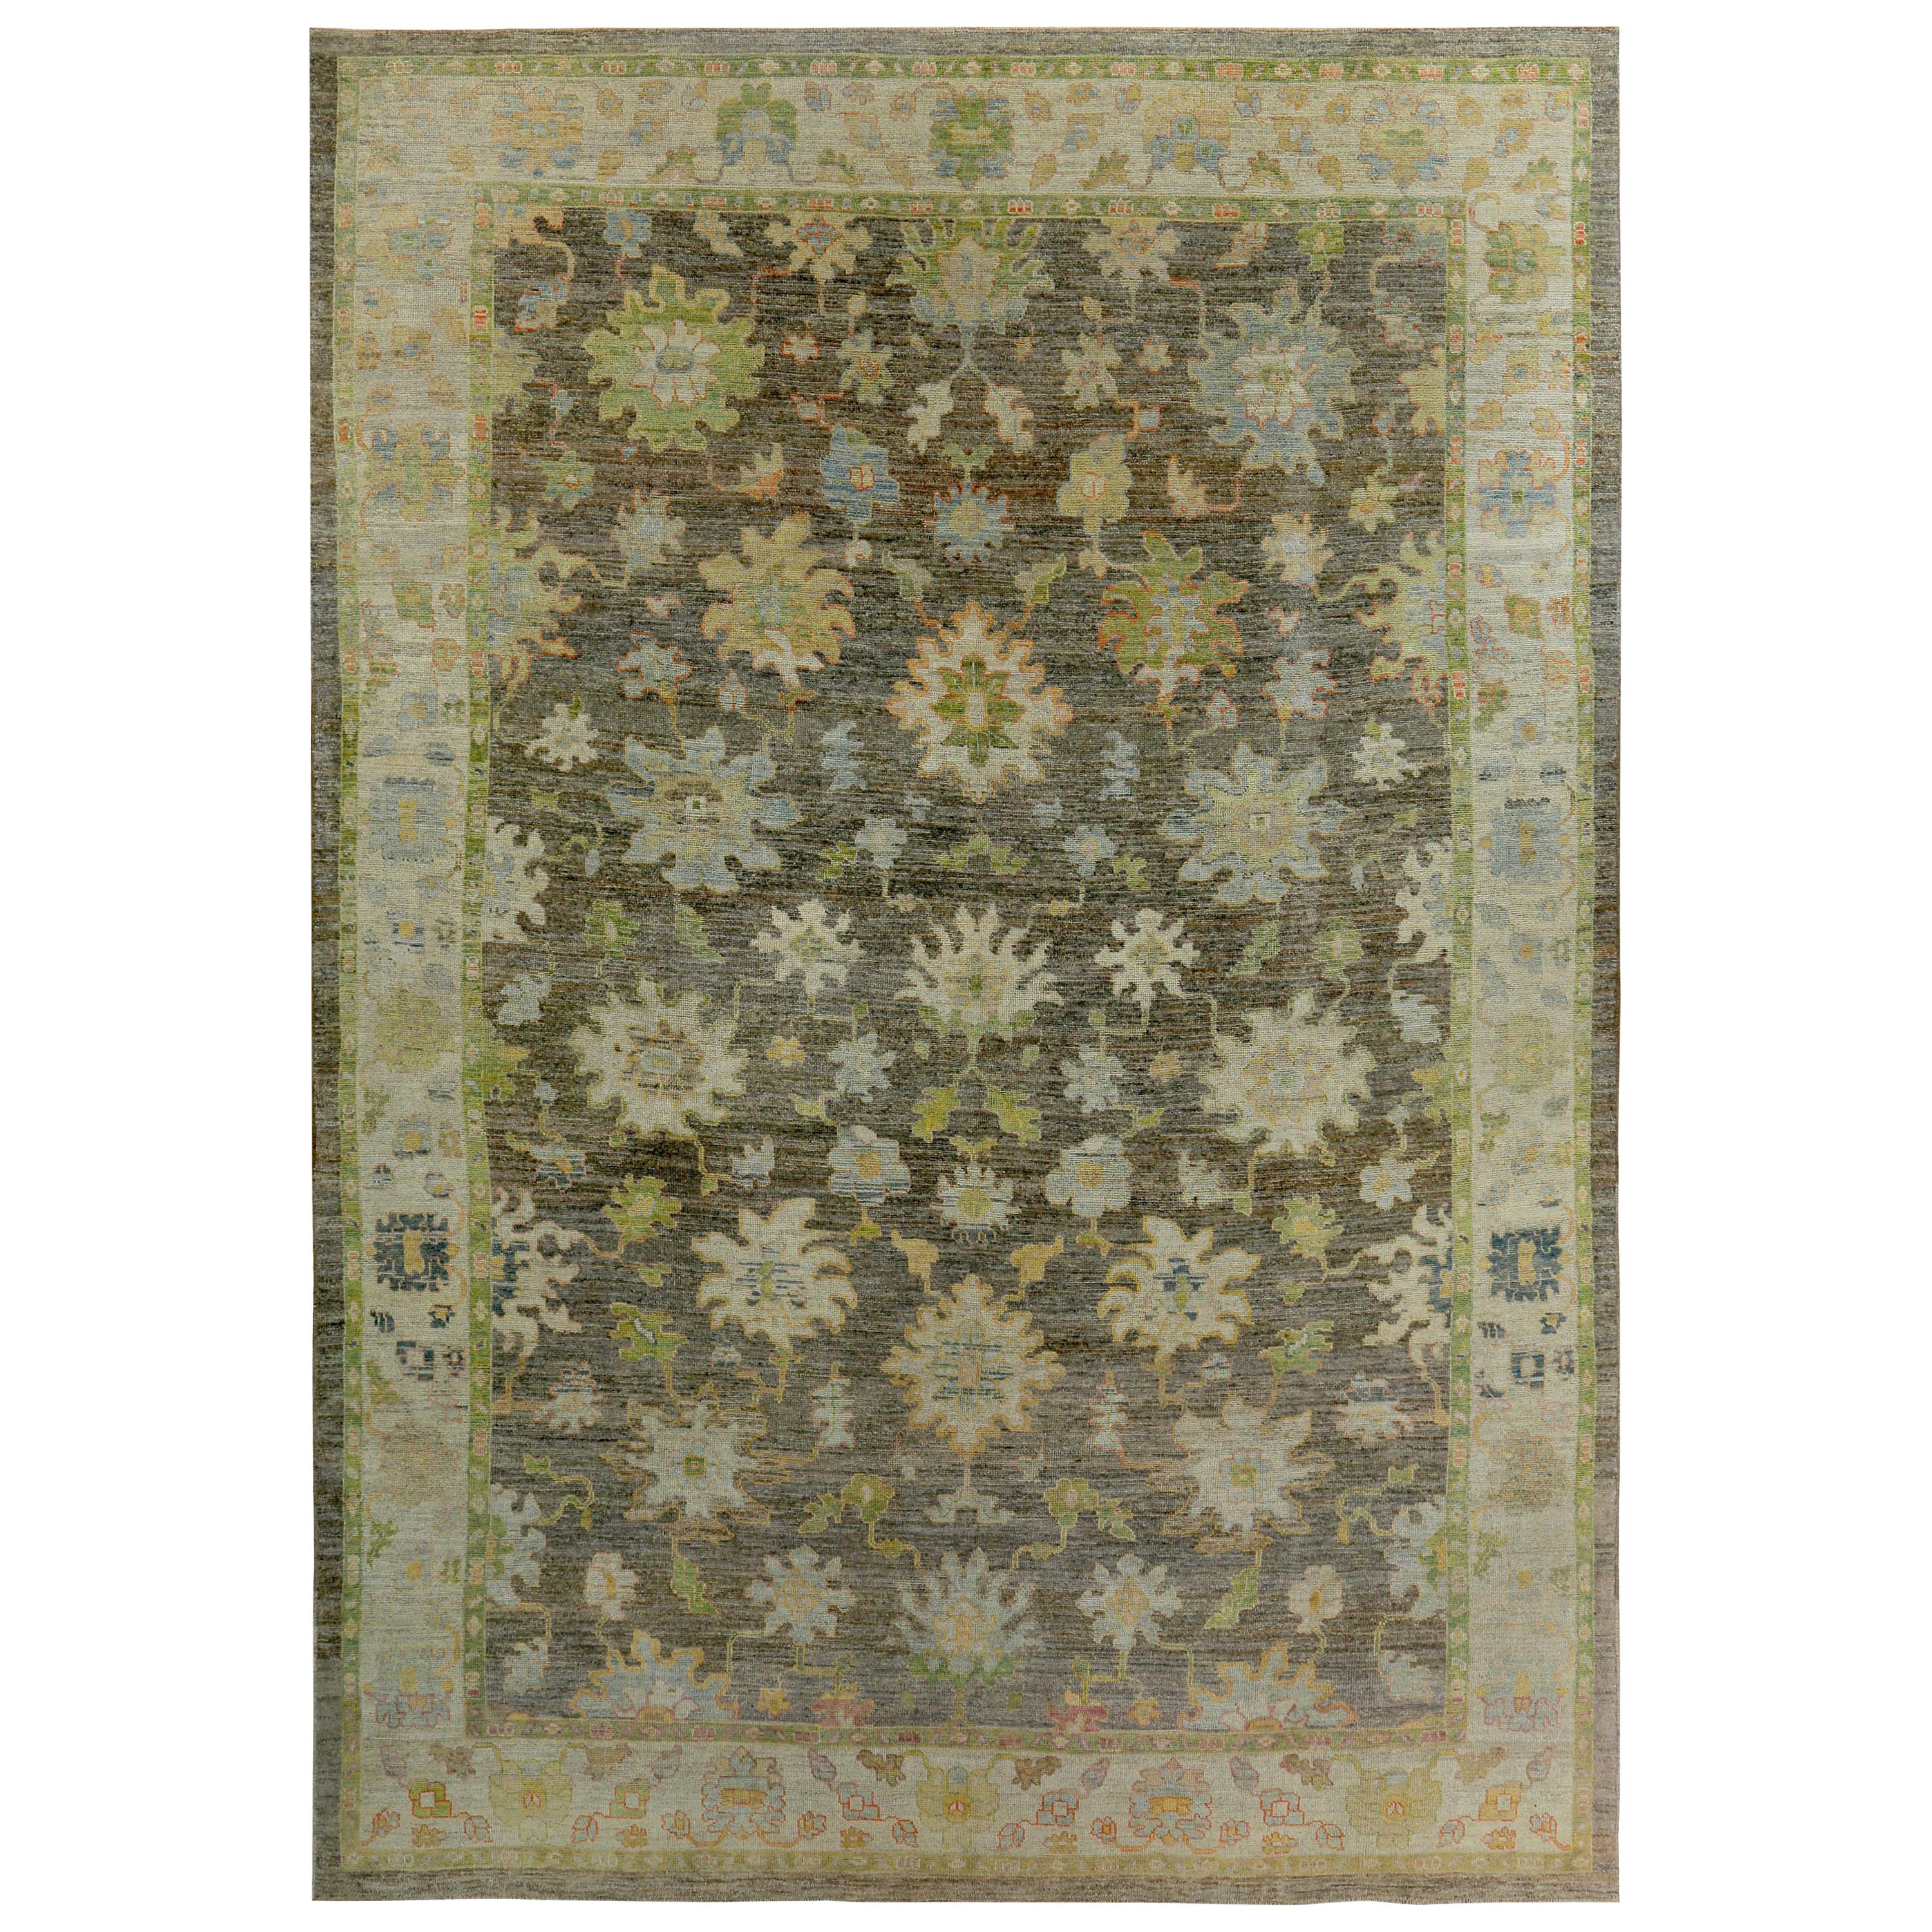 Turkish Oushak Rug with Green and Blue Floral Details on Ivory and Brown Field